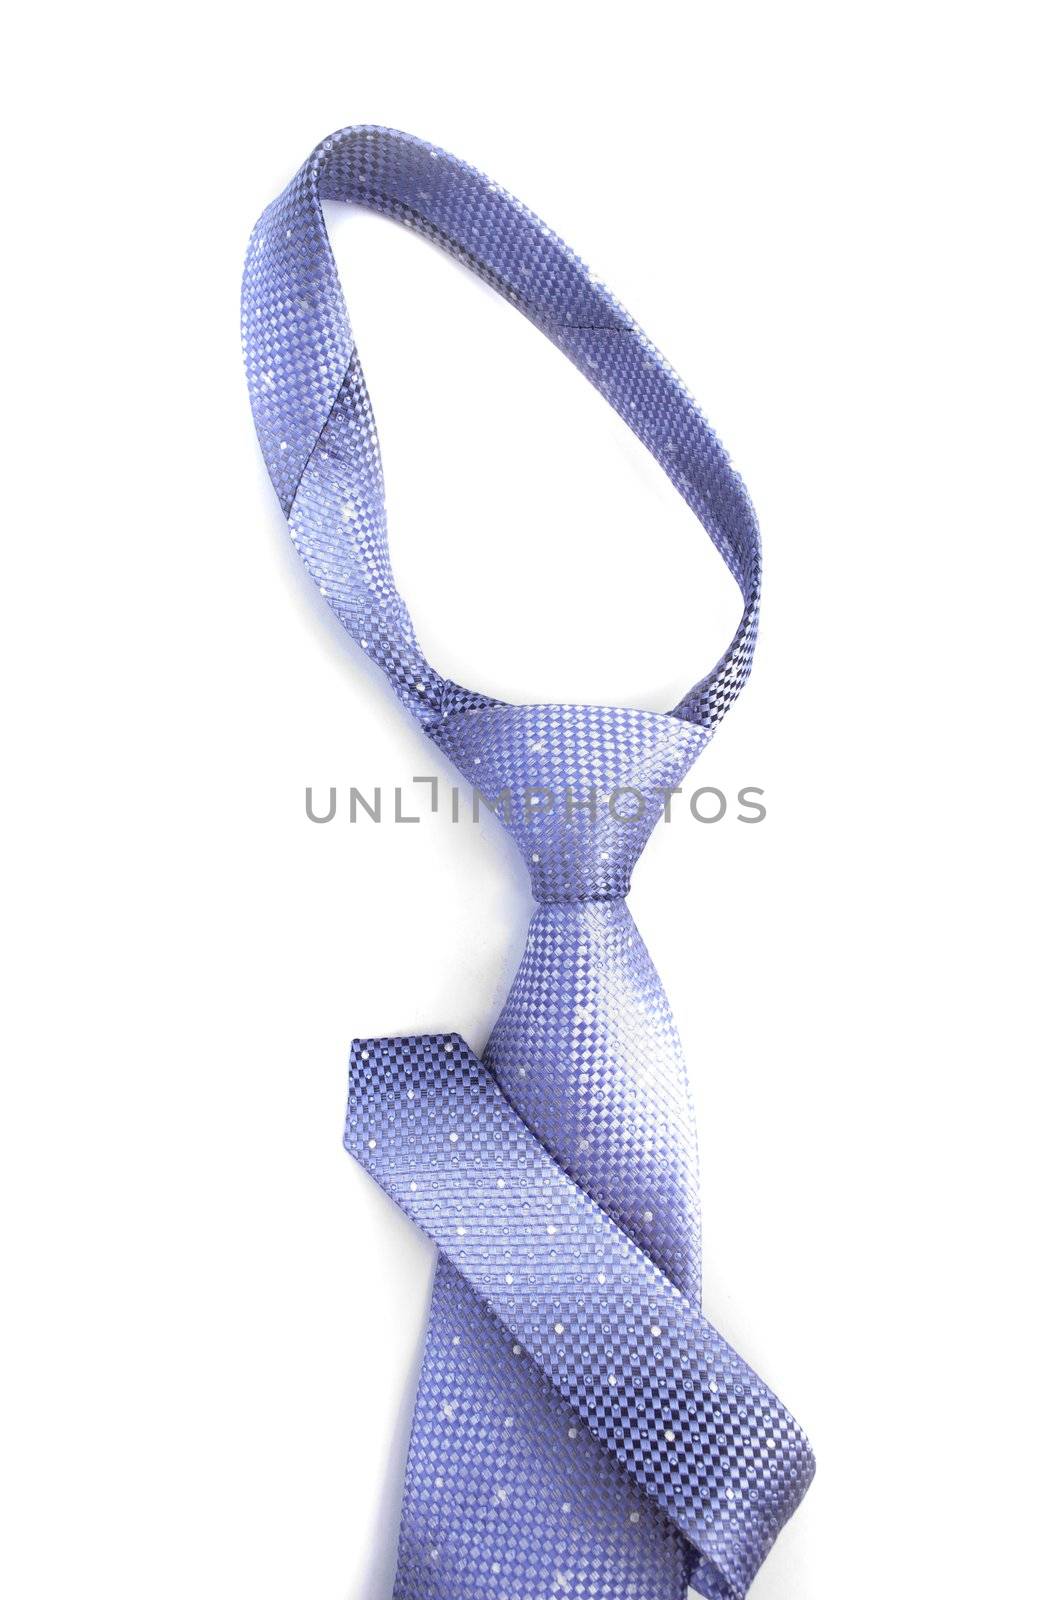 fragment of a tie on a white background